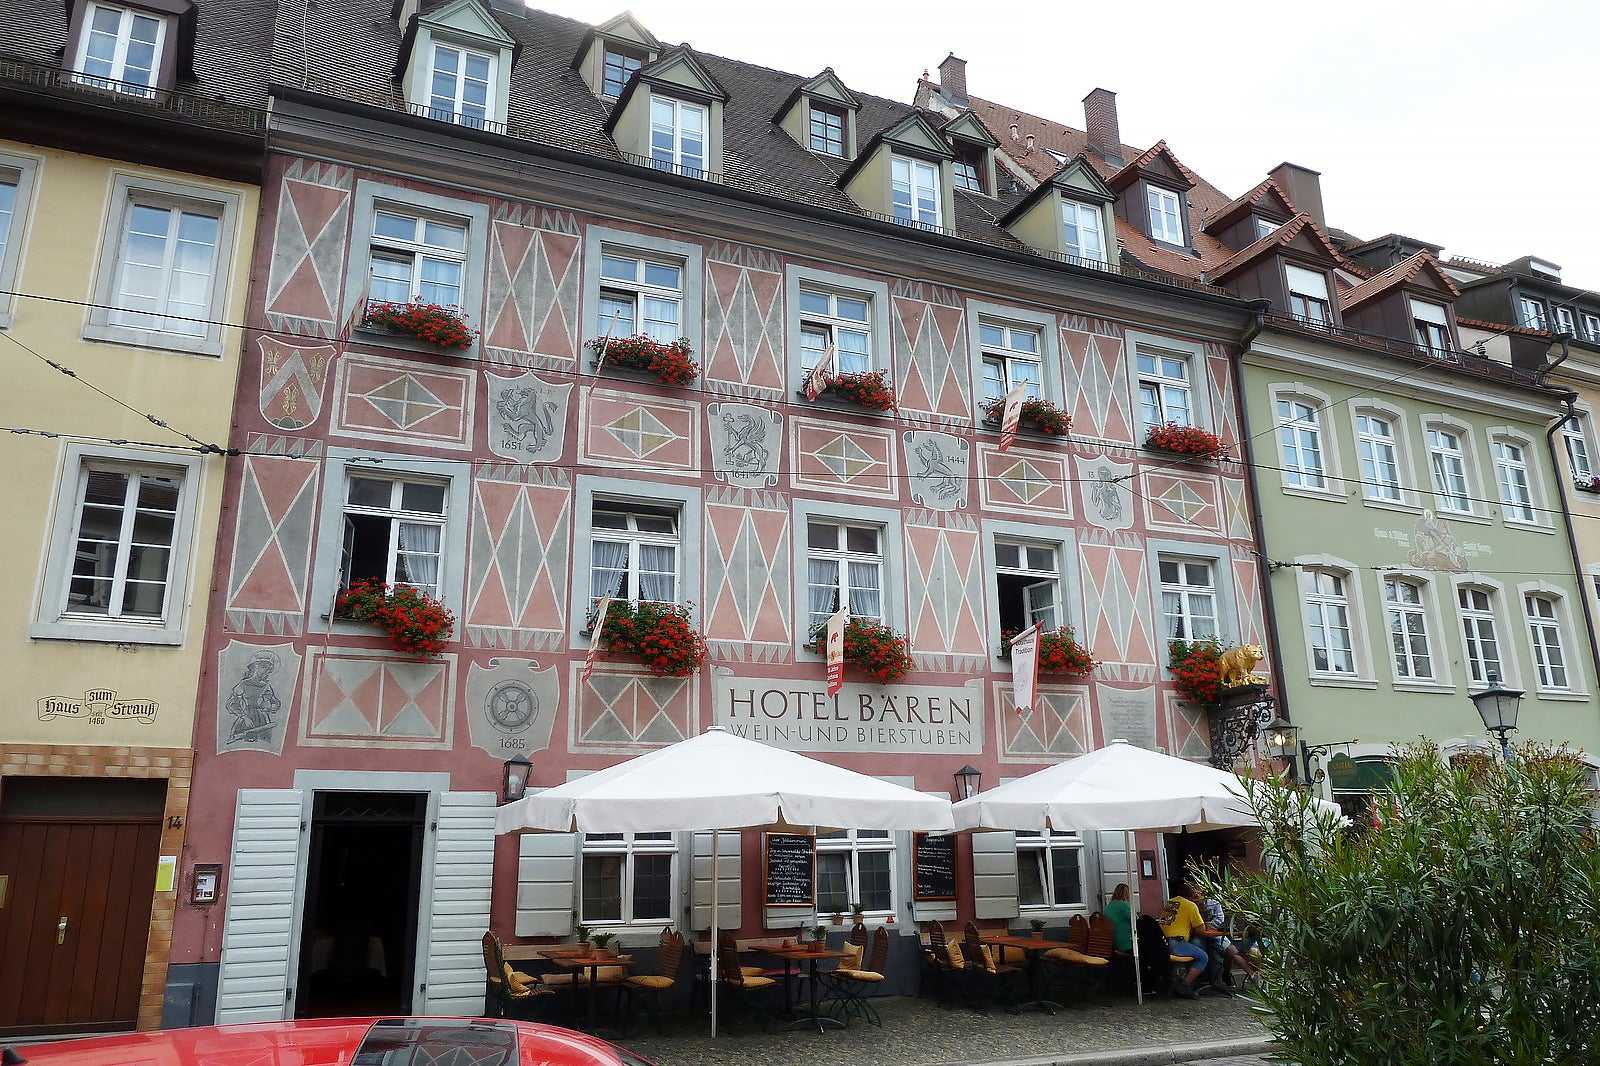 Germany’s oldest hotel